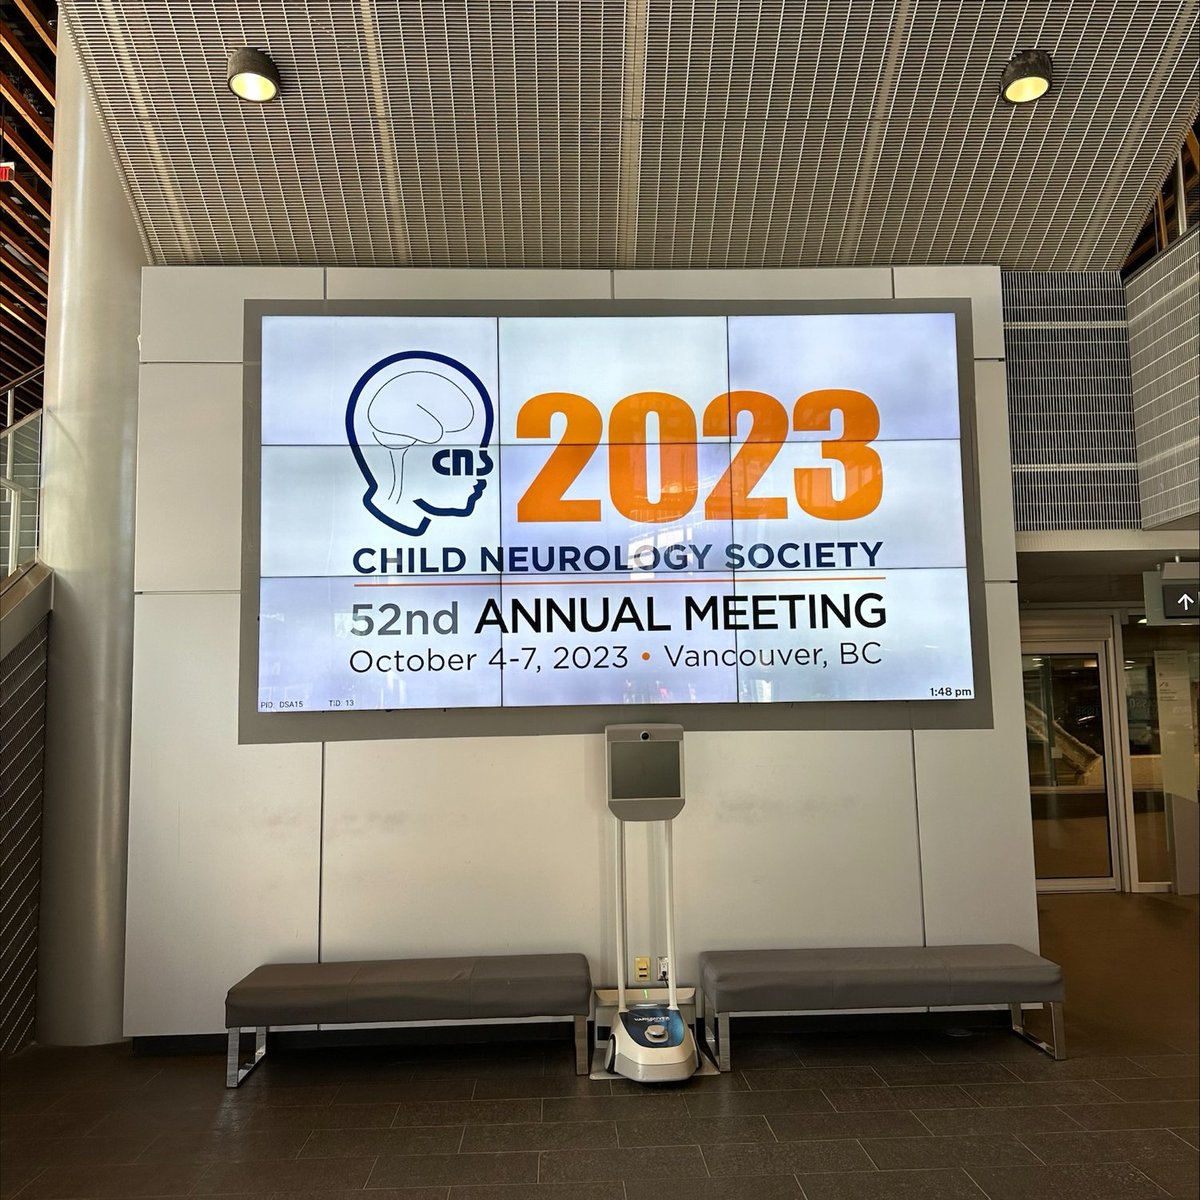 Huge thanks to everyone for making the 52nd Annual Meeting an absolute blast! 😄 In my first year as CEO, it's been a fantastic journey, blending our legacy with an exciting future in child neurology. Can't wait to see you in San Diego in 2024!  #CNSAM